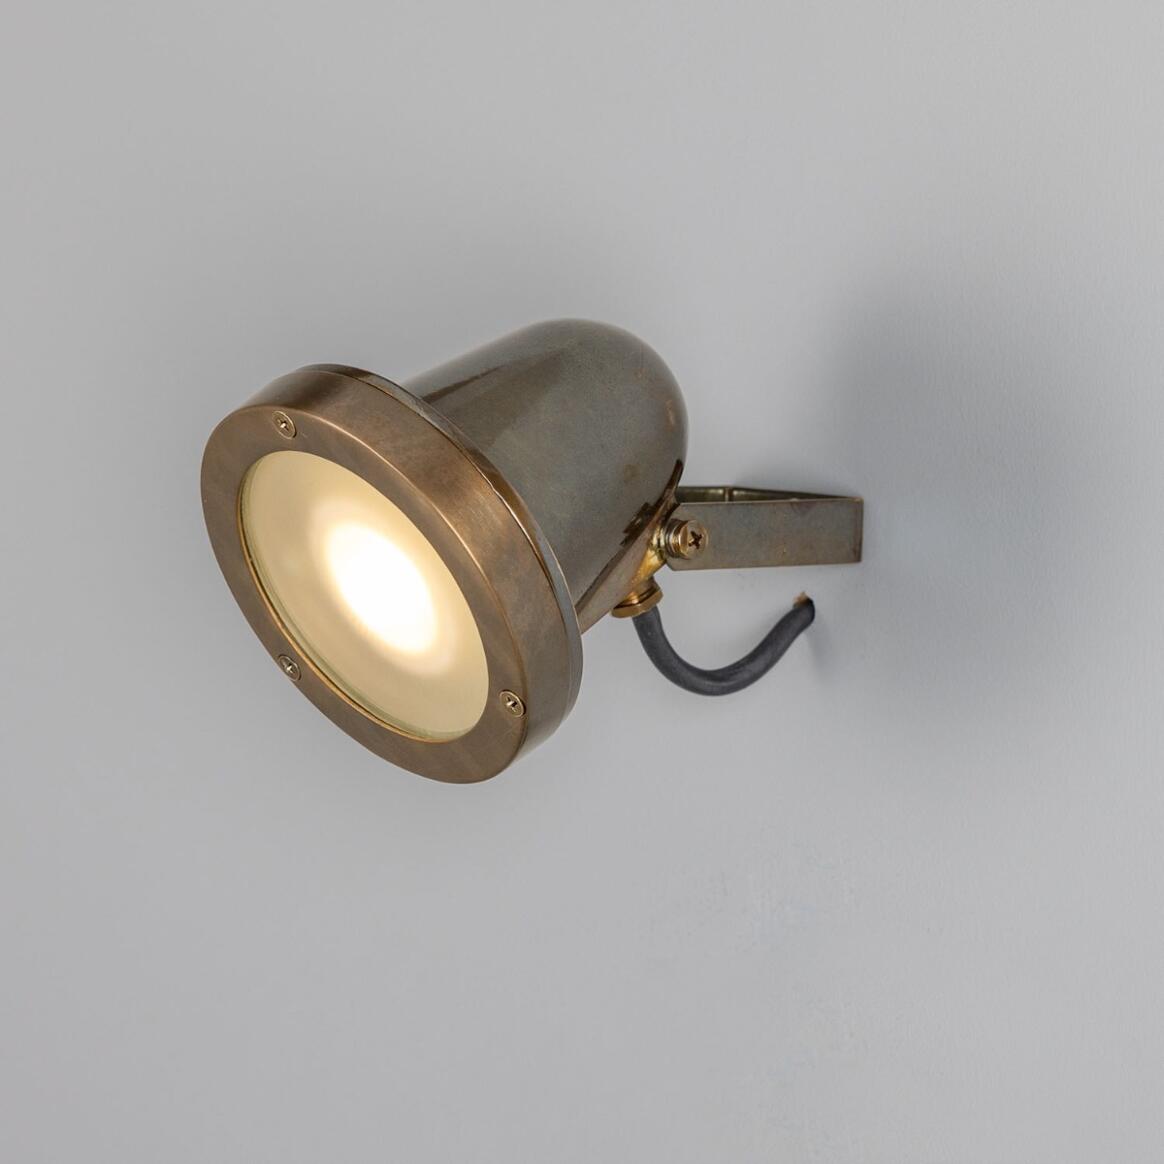 Thames Adjustable Outdoor Spot Light IP64 main product image